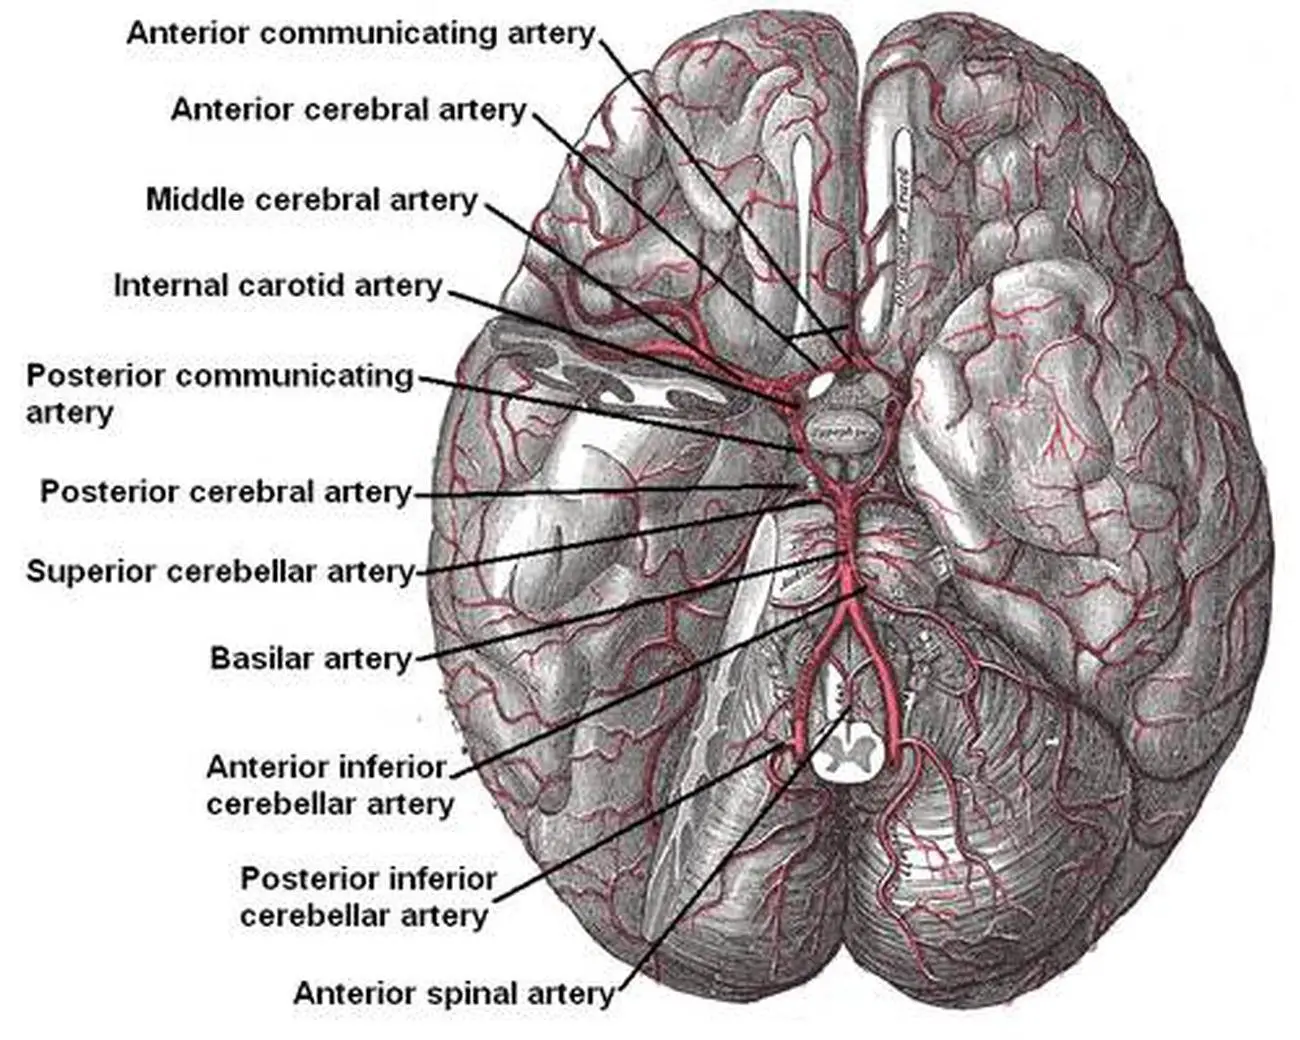 Pictures Of Anterior Communicating Artery